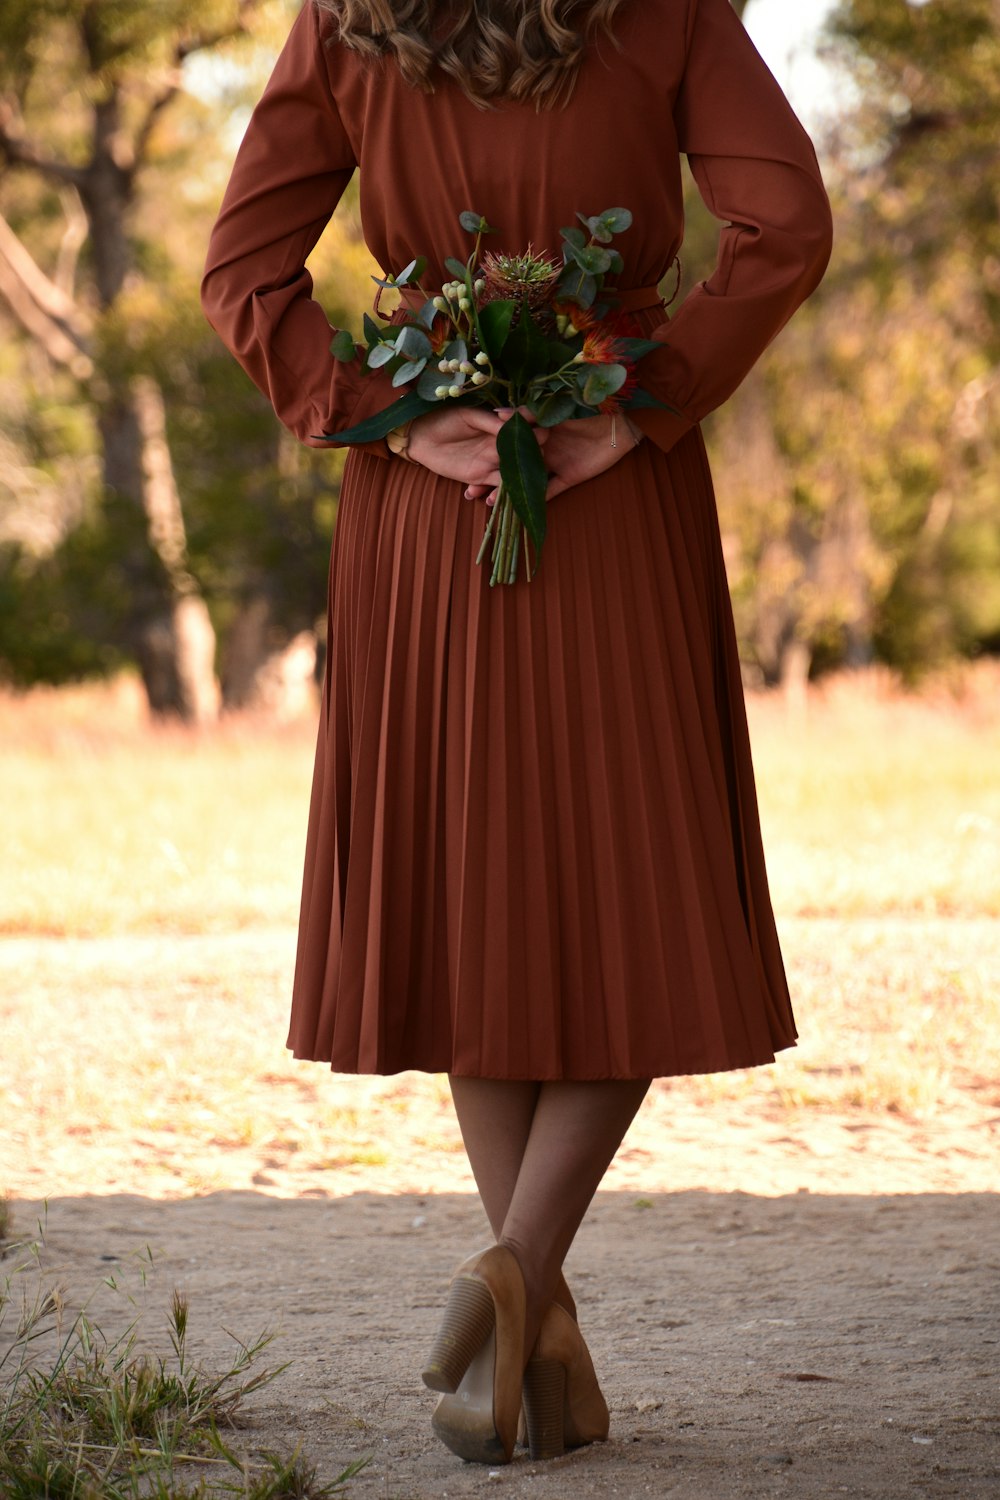 woman in red dress holding bouquet of flowers